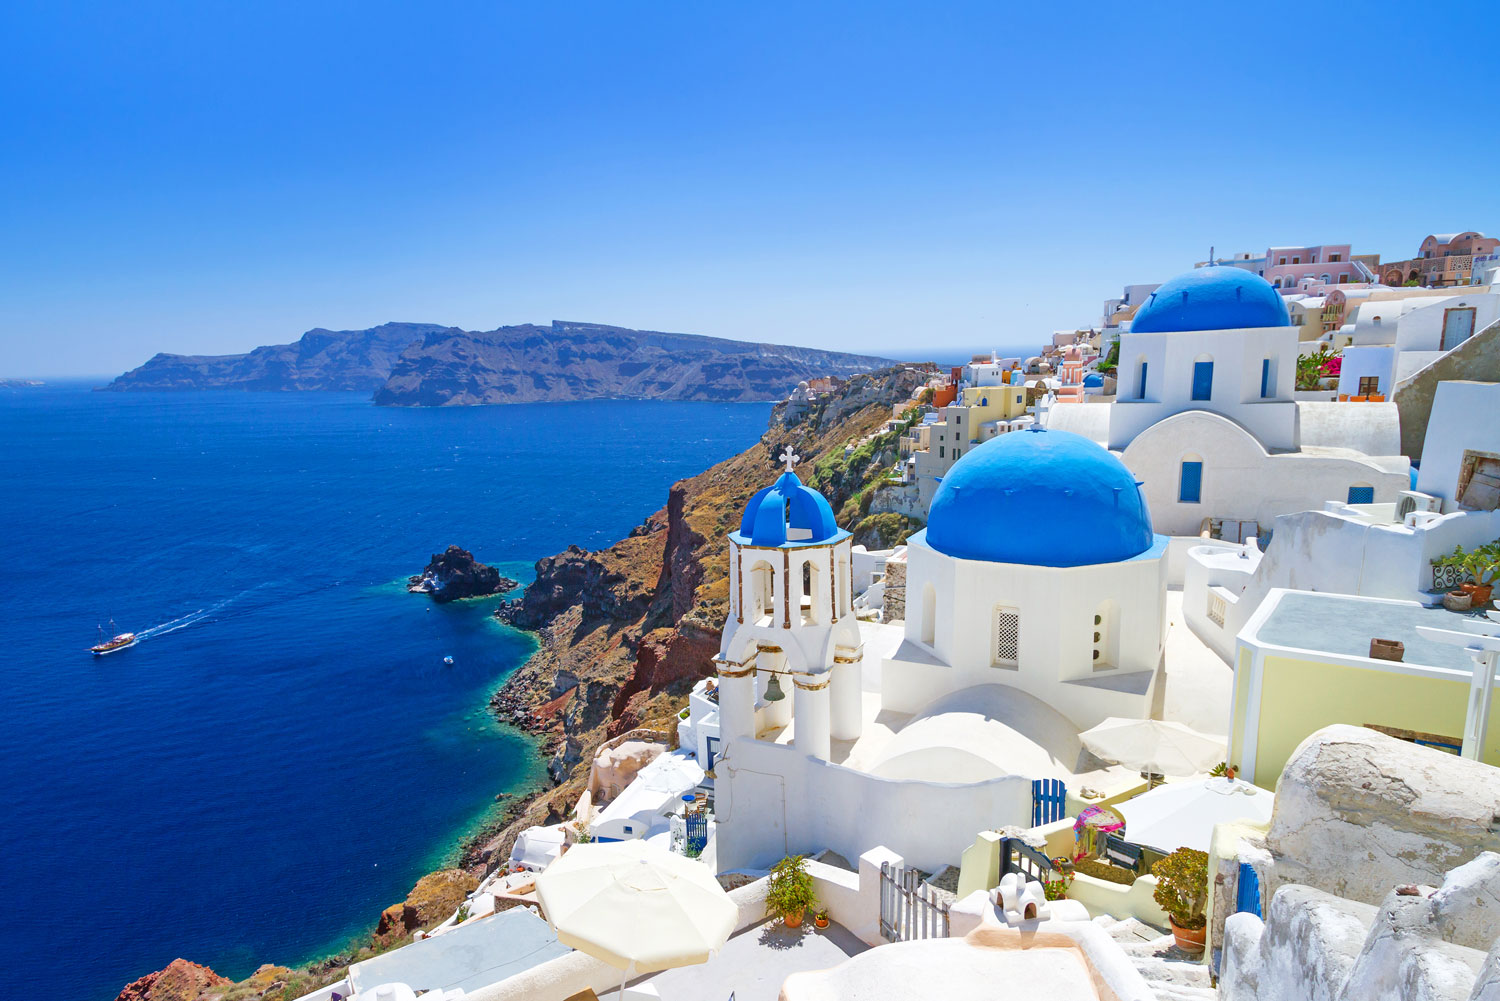 This Is the Hardest General Knowledge Quiz You’ll Ever Take, We Promise Greek island